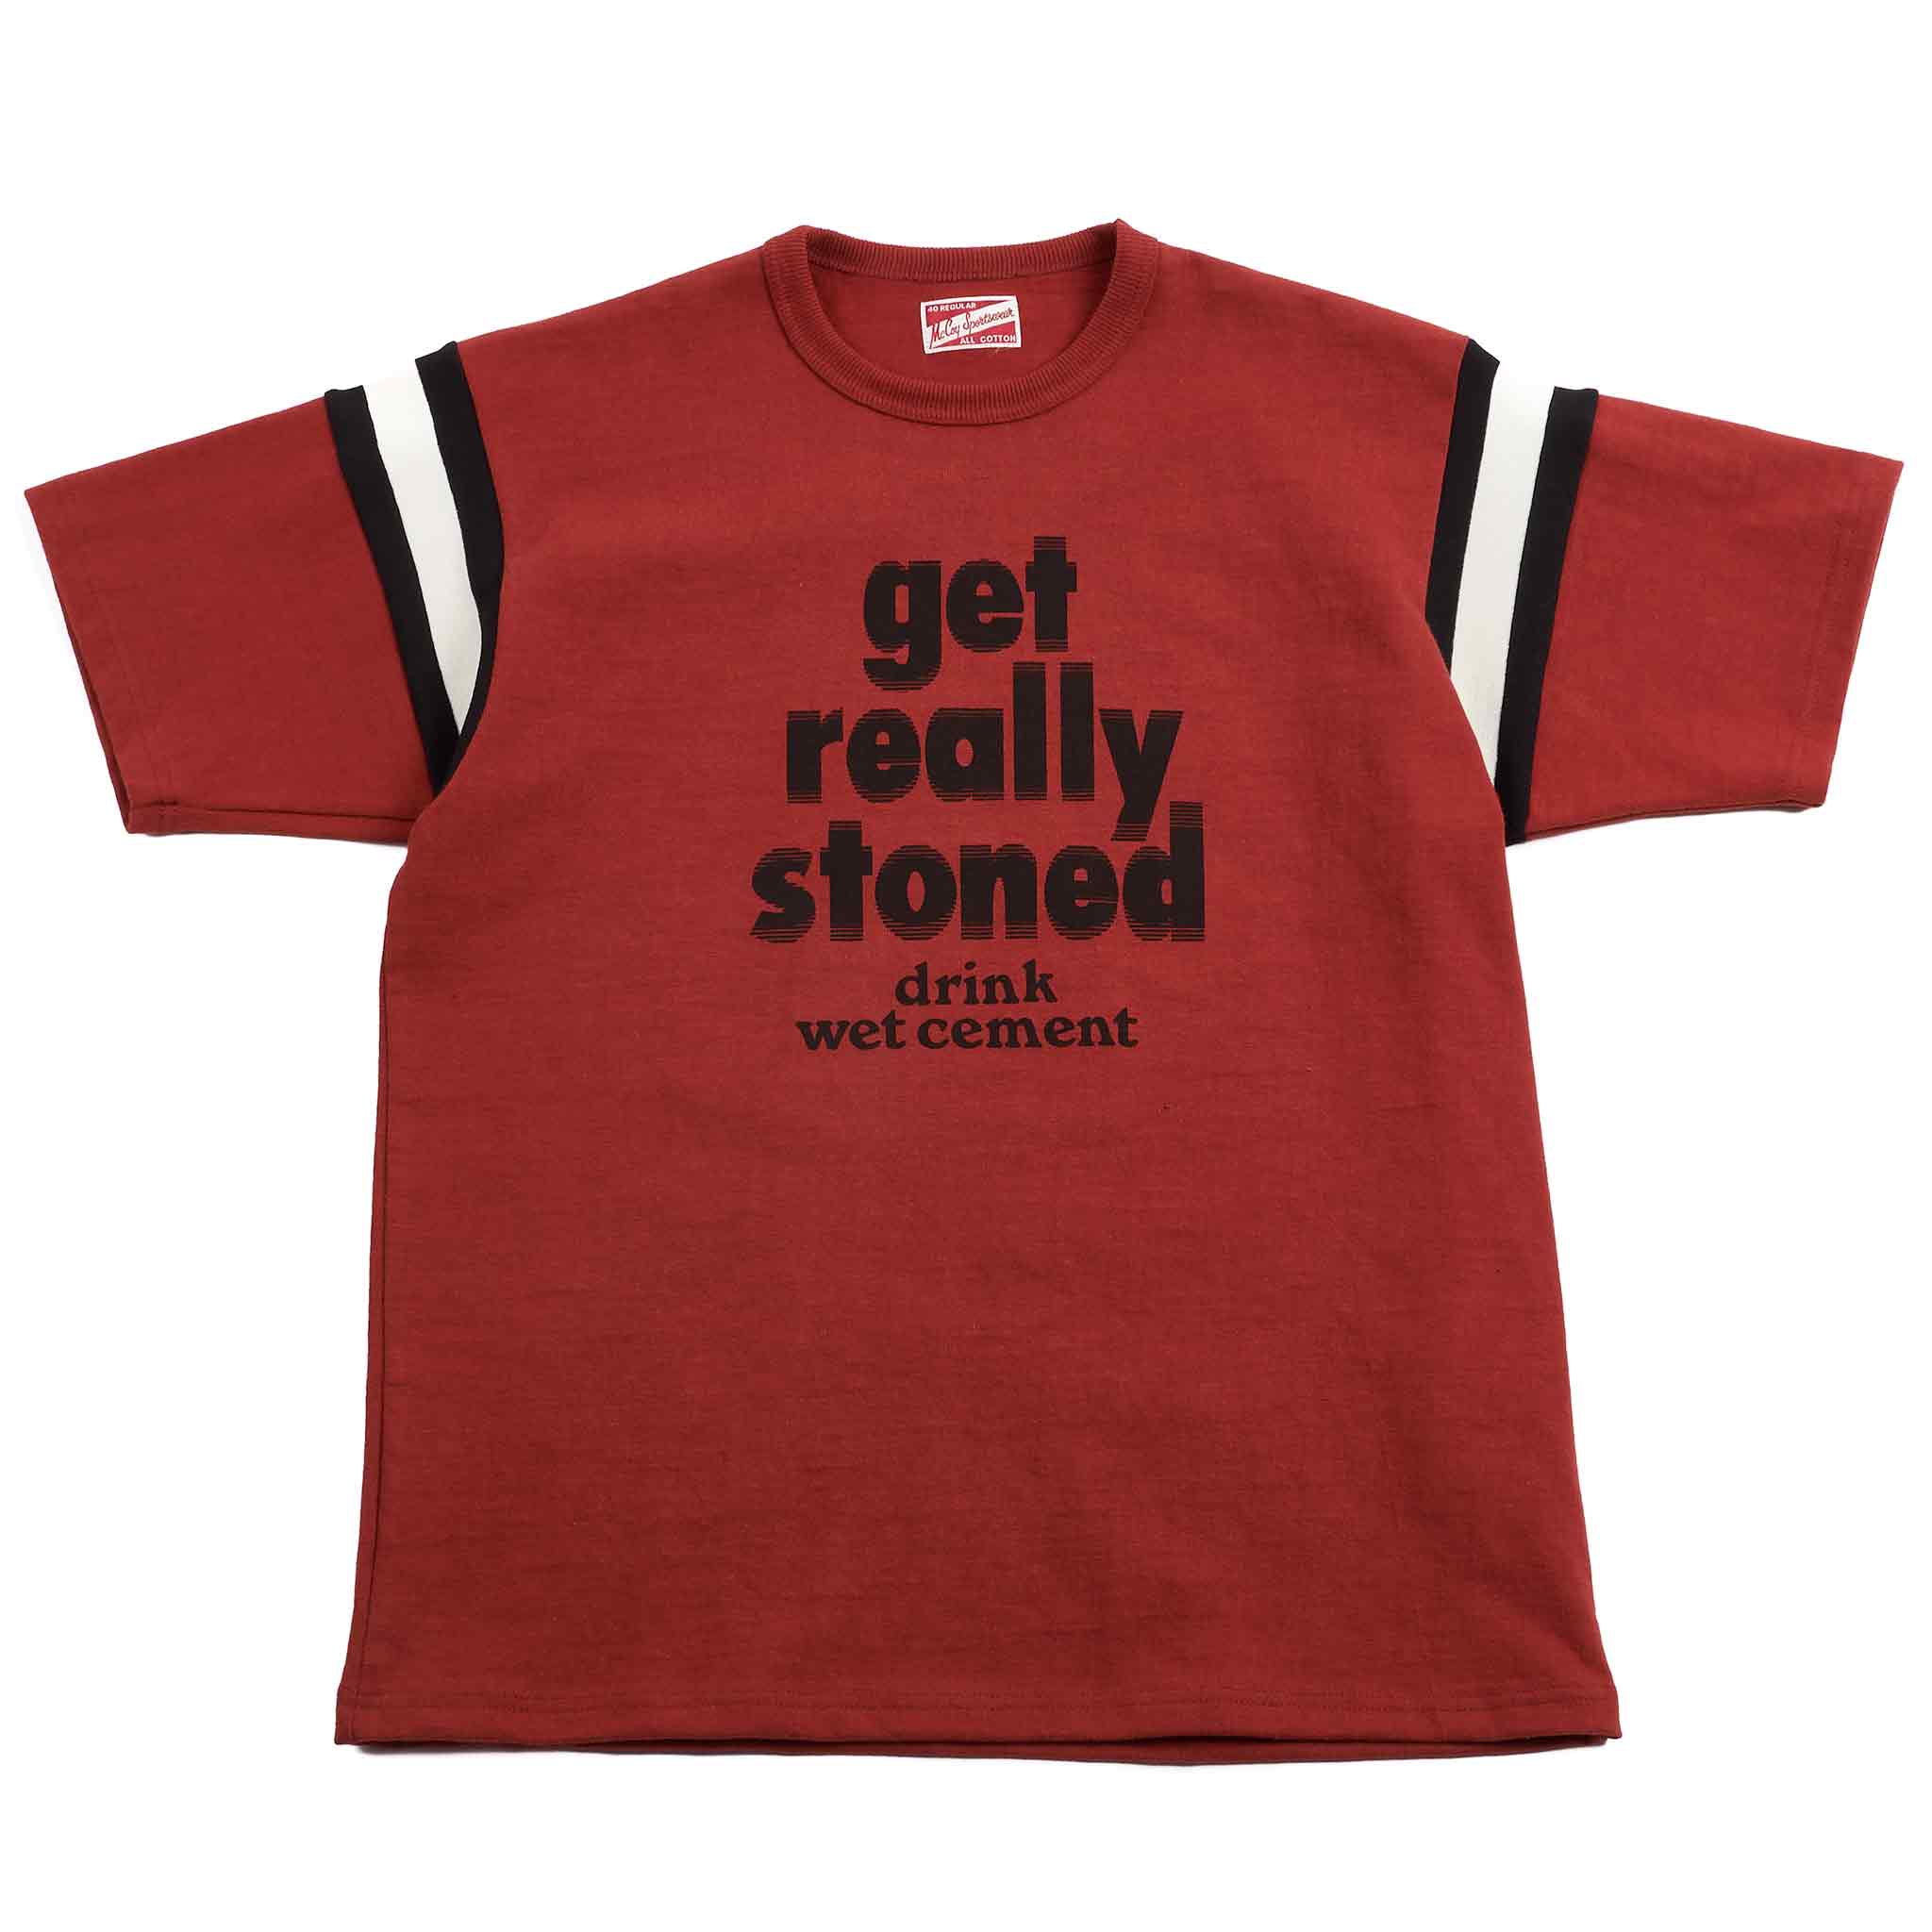 The Real McCoy's MC21027 Cotton Athletic Jersey / Get Really Stoned Red